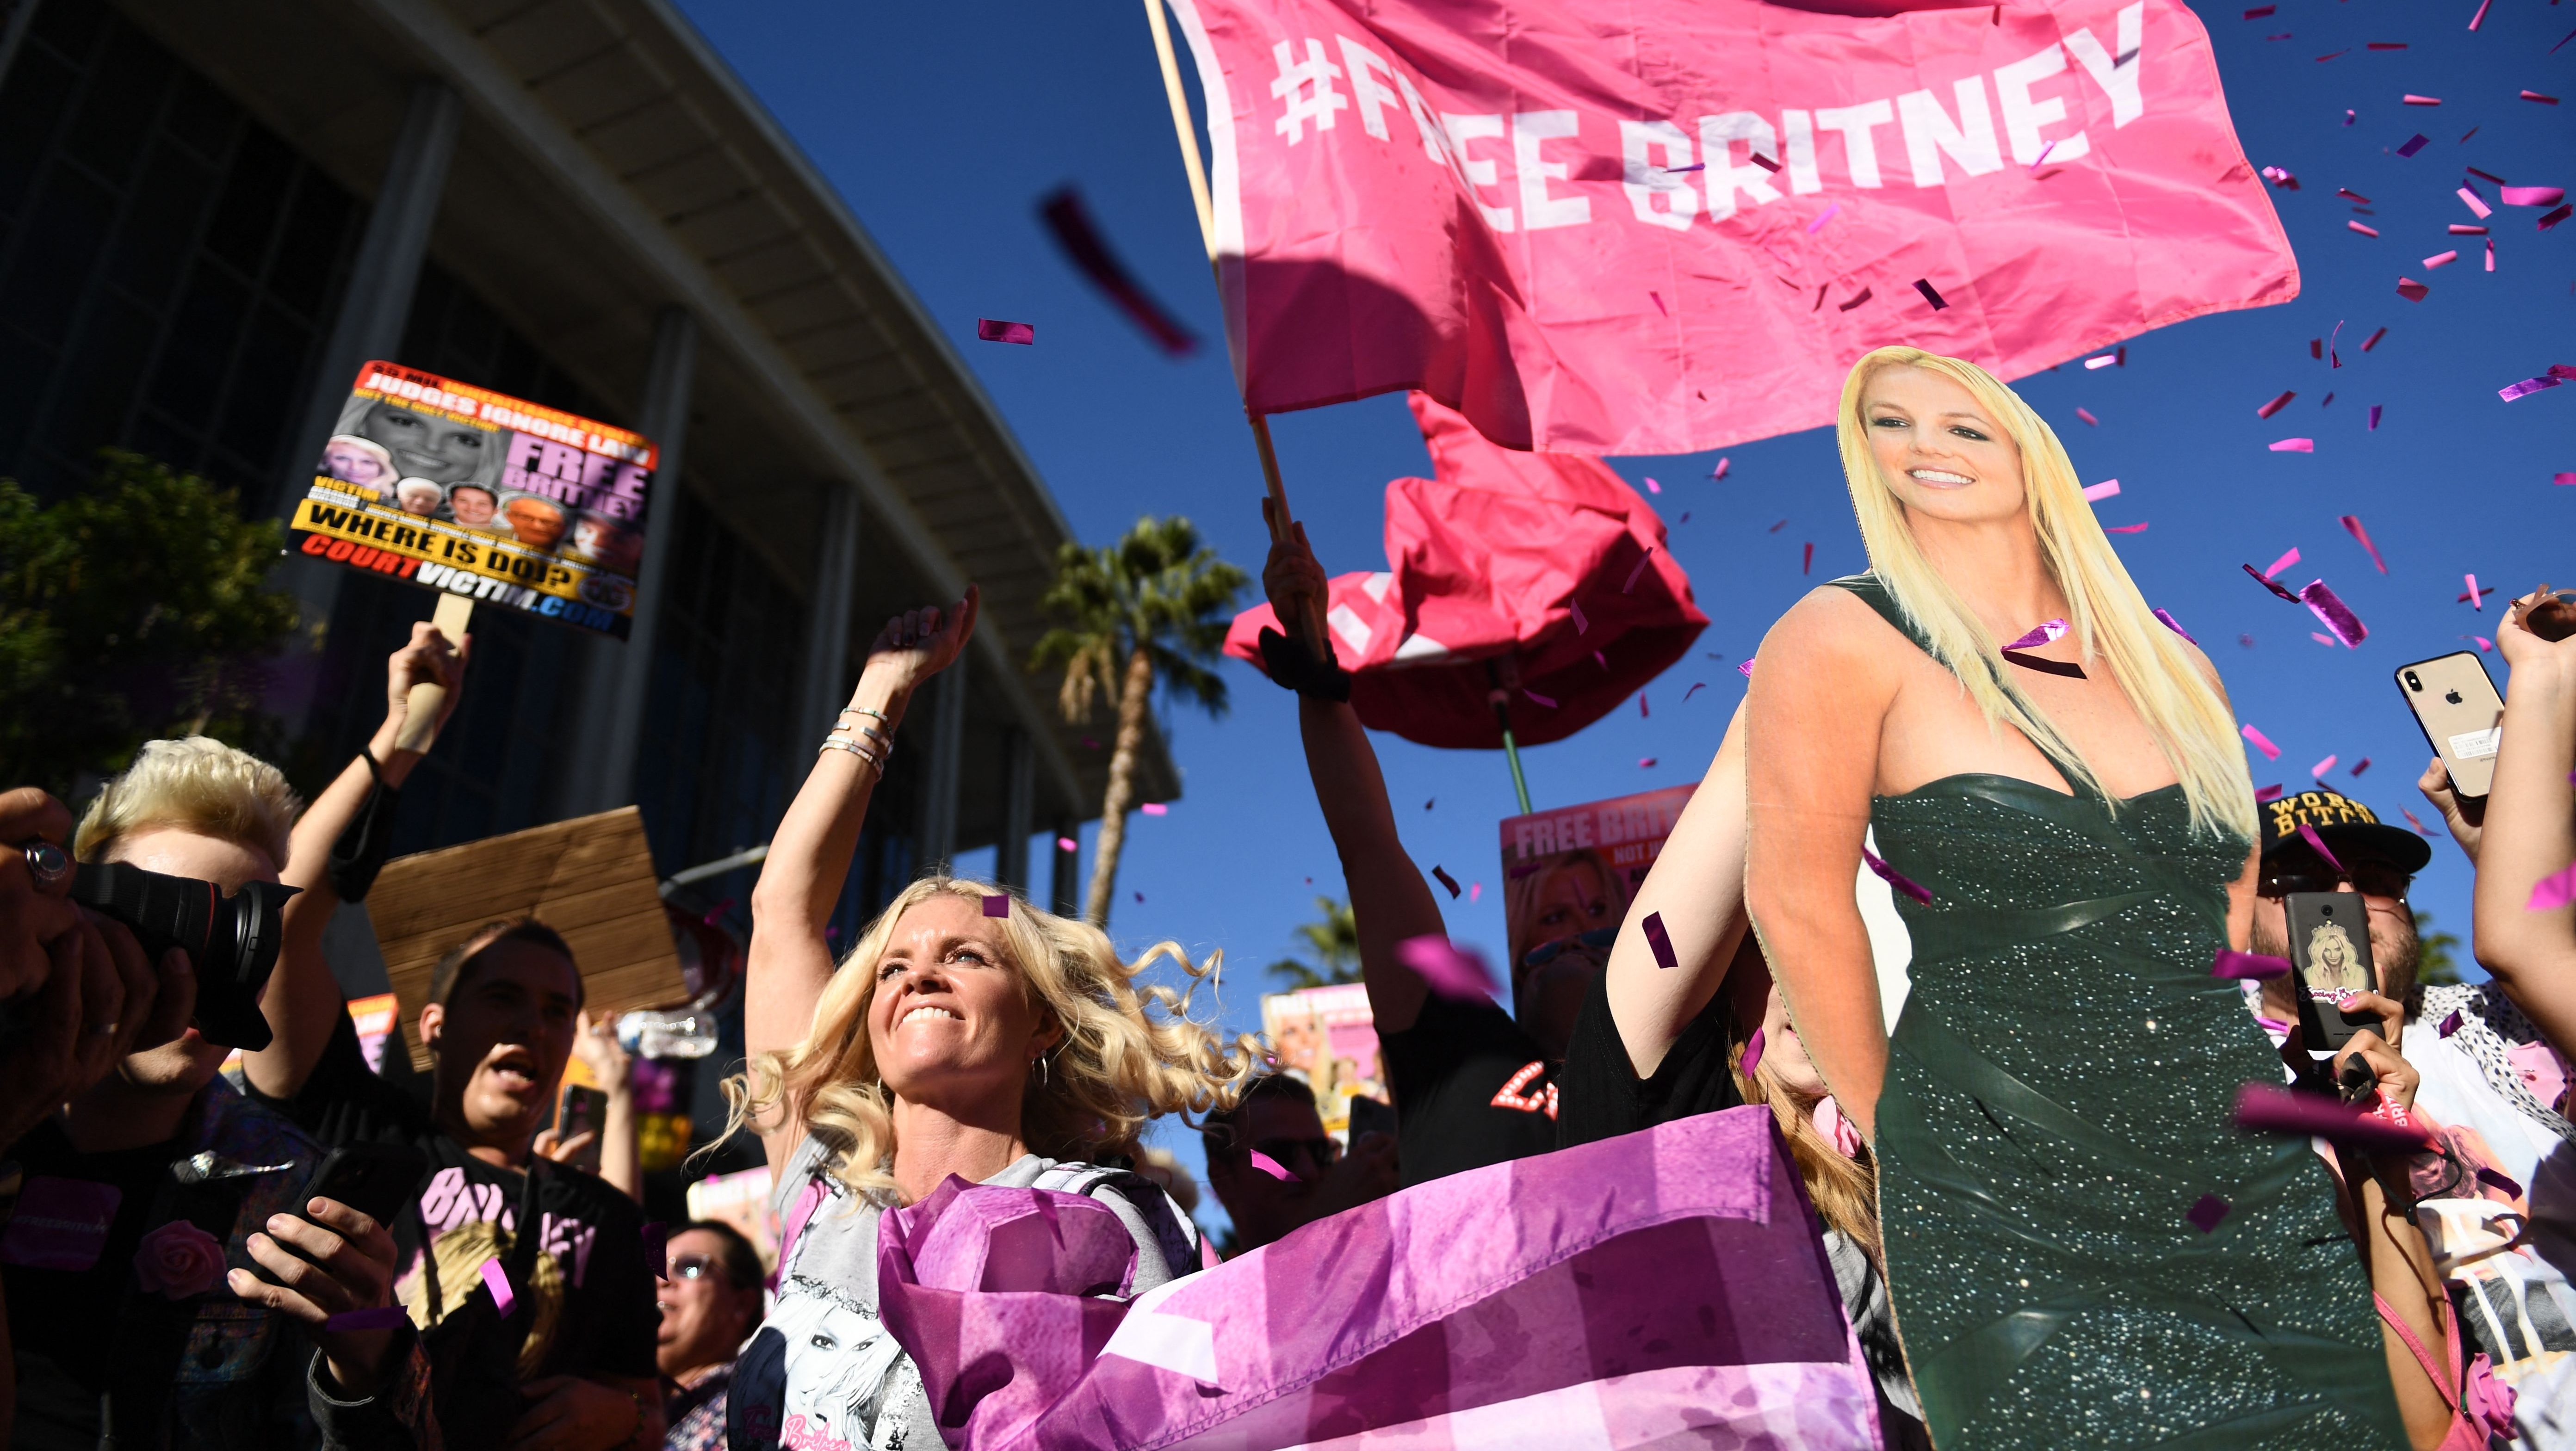 Supporters of the "Free Britney" movement rally in support of musician Britney Spears outside the Stanley Mosk courthouse in Los Angeles, California, Nov. 12, 2021. - A Los Angeles judge on Friday formally approved the process of ending the controversial guardianship that has controlled Spears' life for the past 13 years.